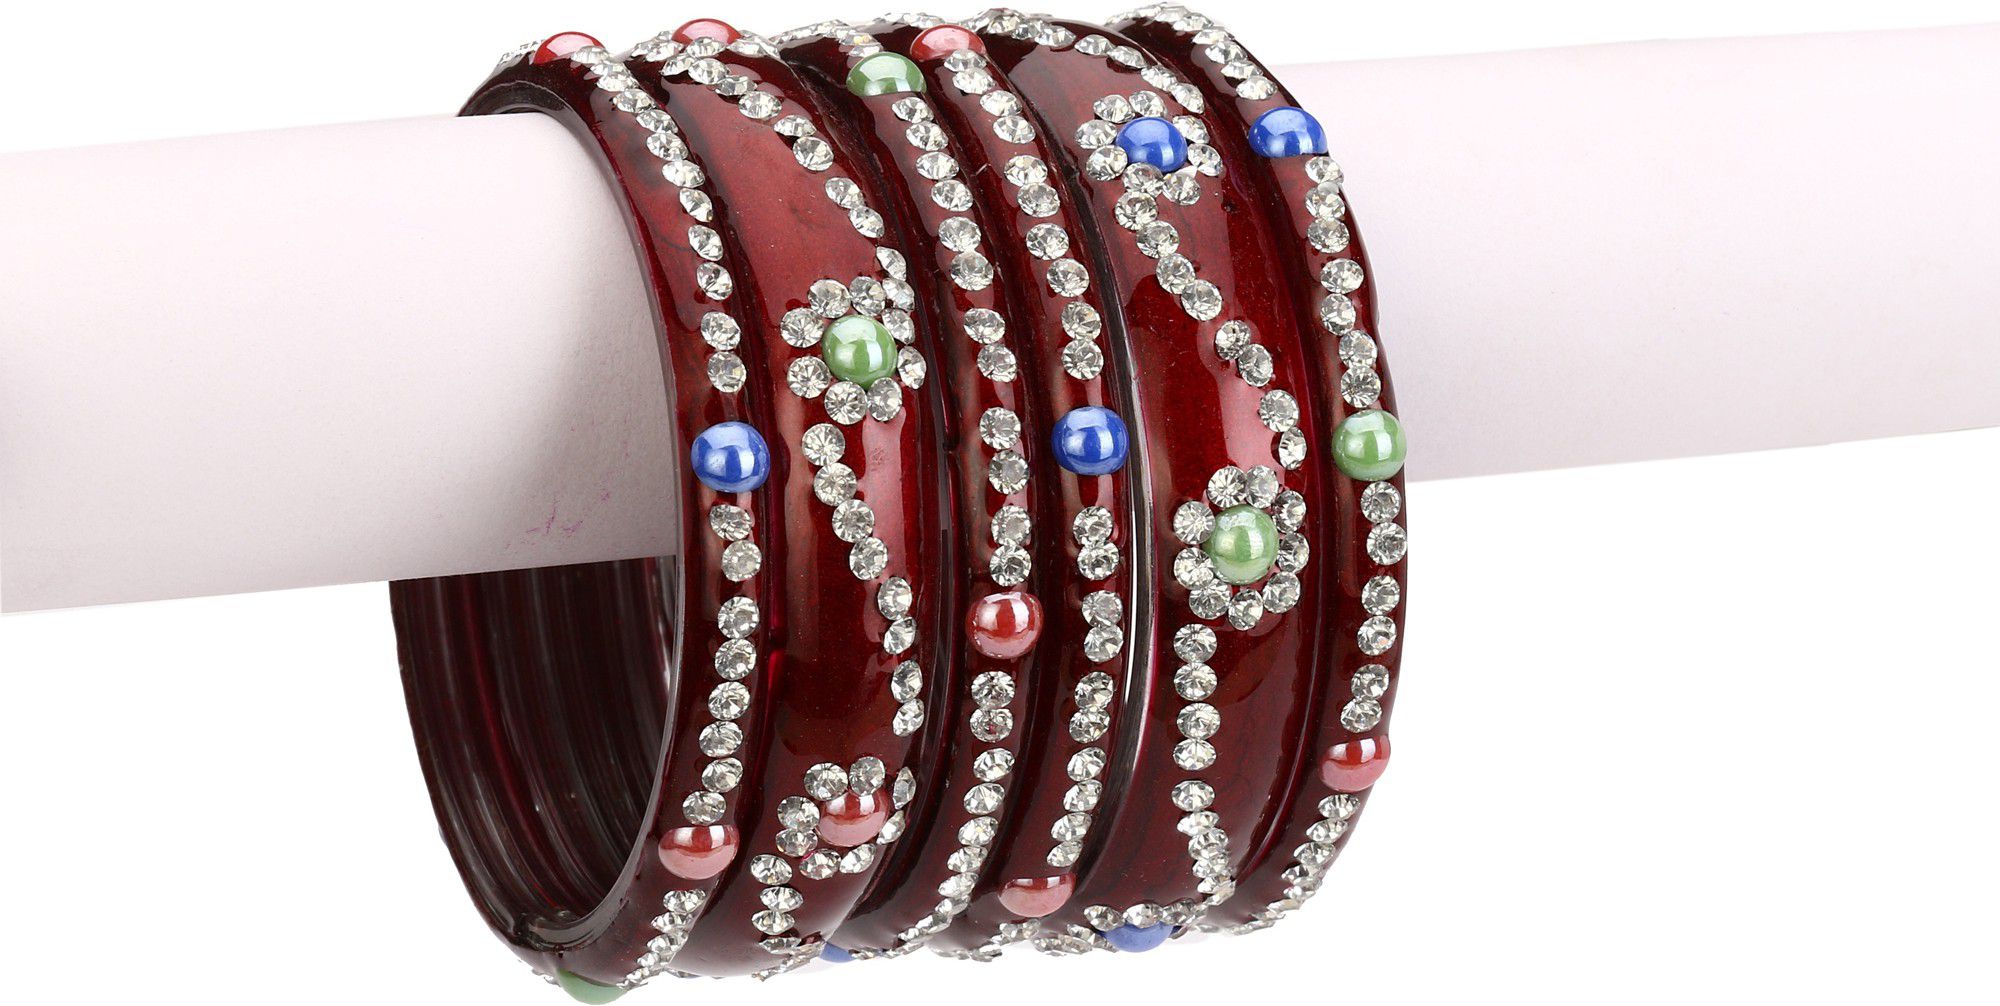     			Somil Maroon Color 2 & 4 Bangle Set decorative With Colorful Beads & Stones With Safety Box-DN_2.6